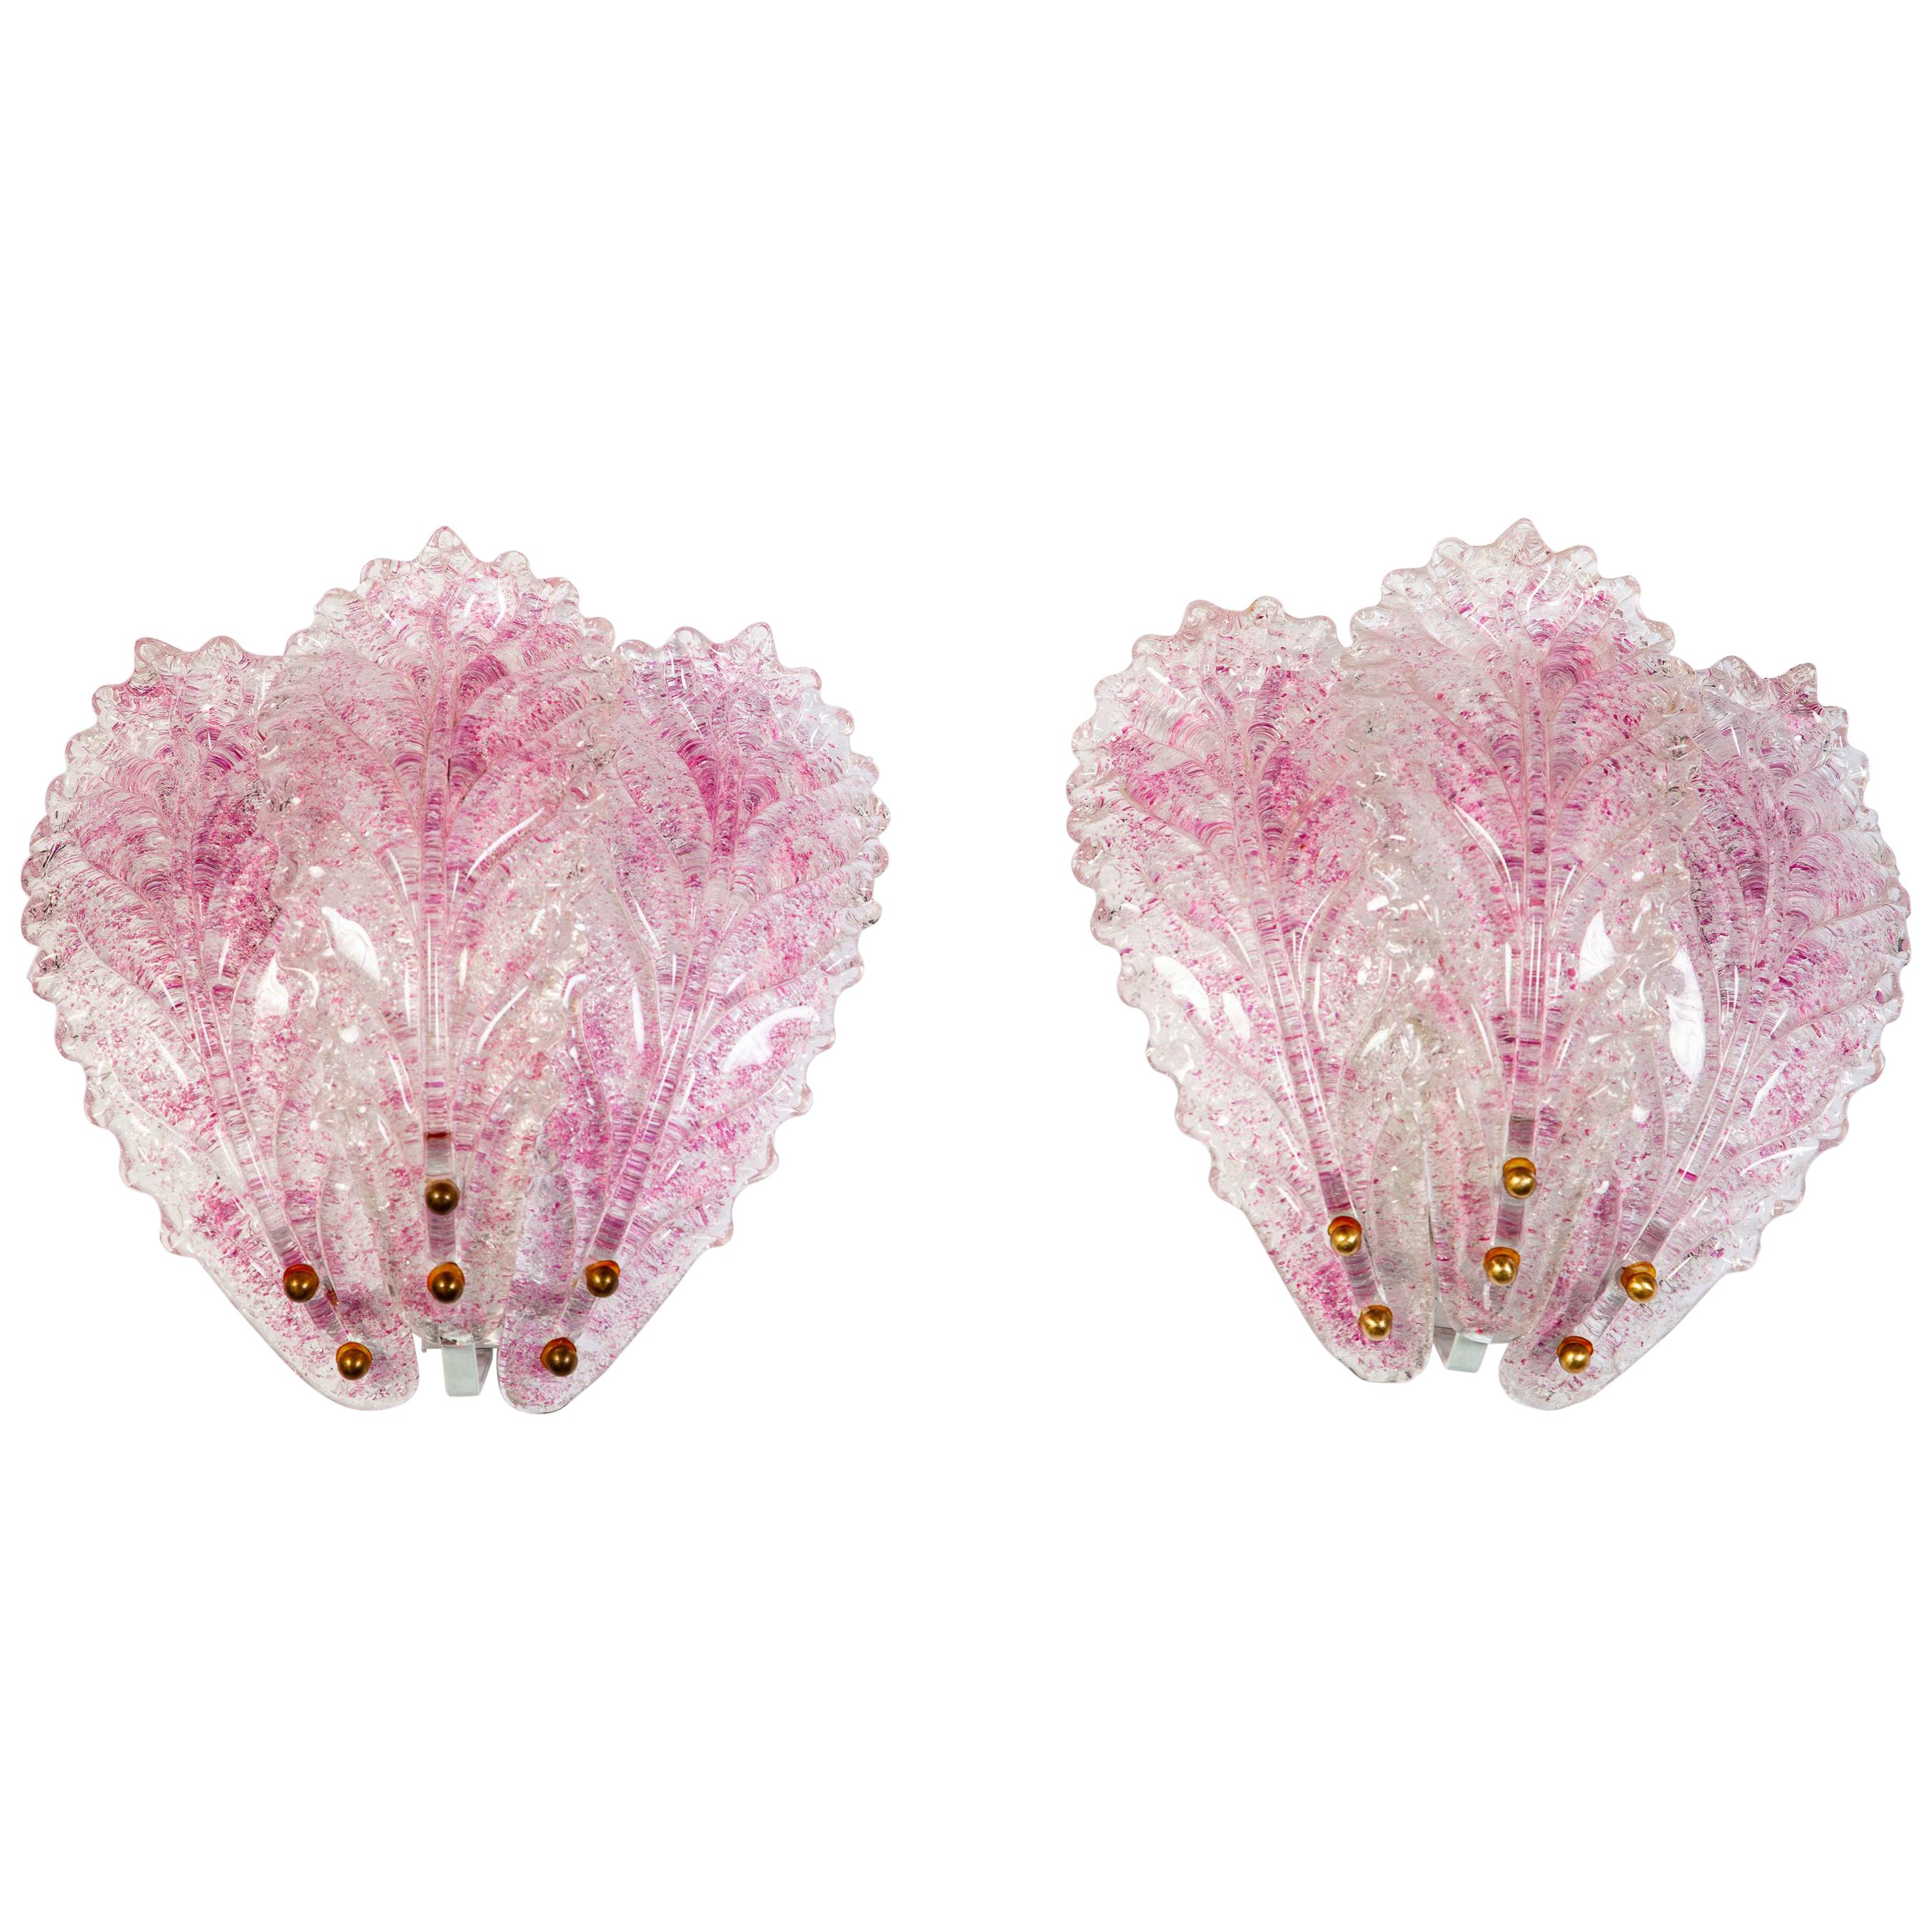 Pair of Modern Italian Pink Murano Glass Leave Wall Lights or Sconces, 1970